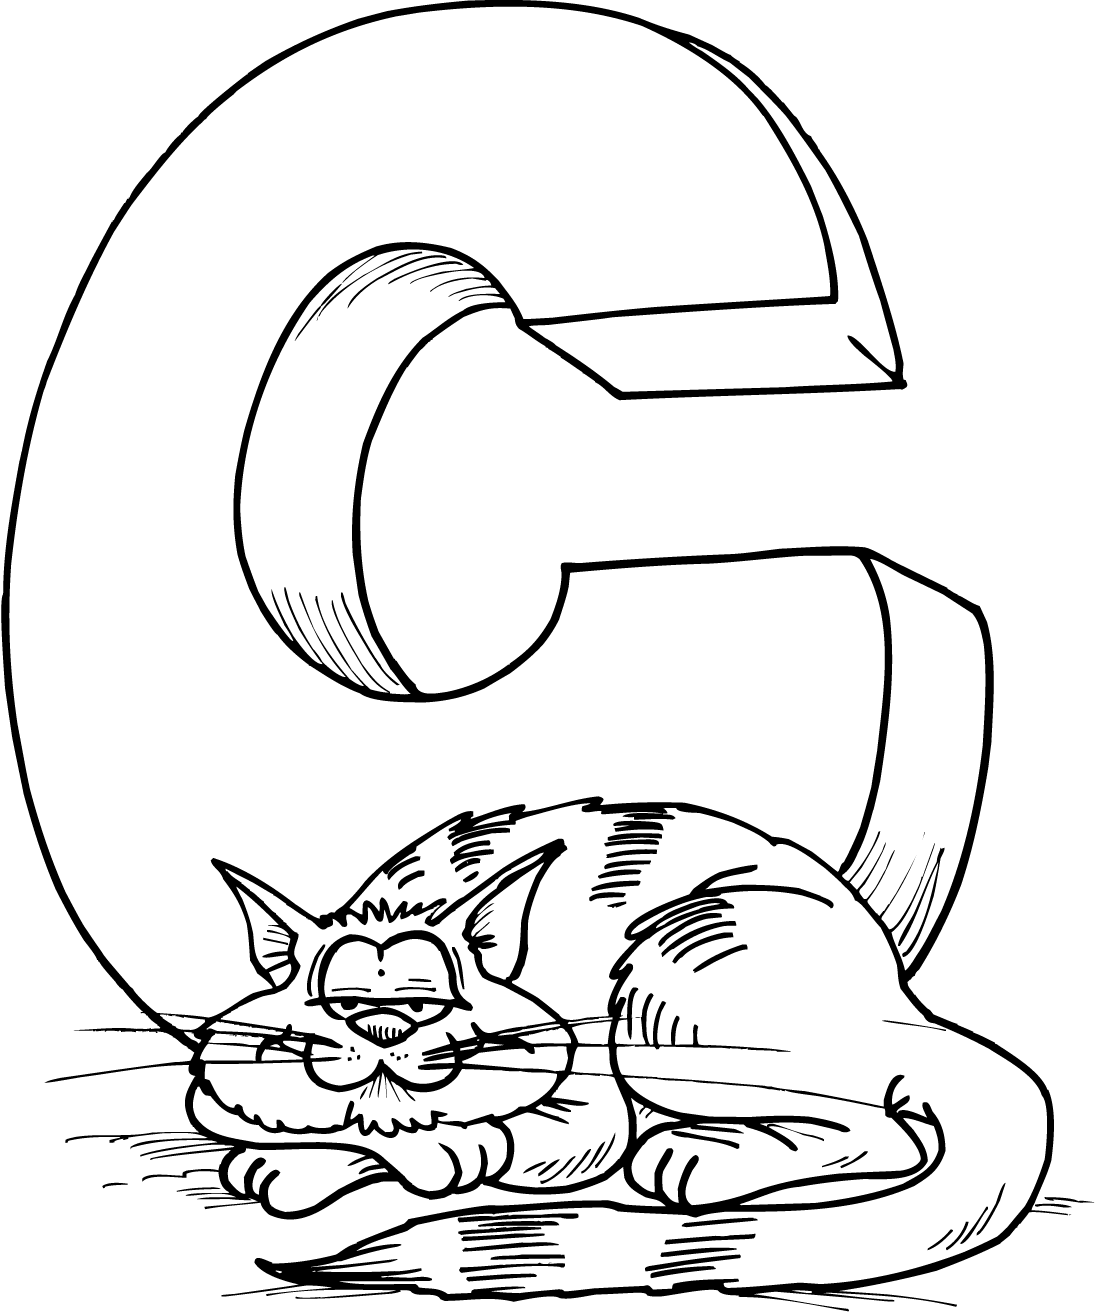 A B C Coloring Pages Printable Sheets letter c Only 2021 a 0037 Coloring4free